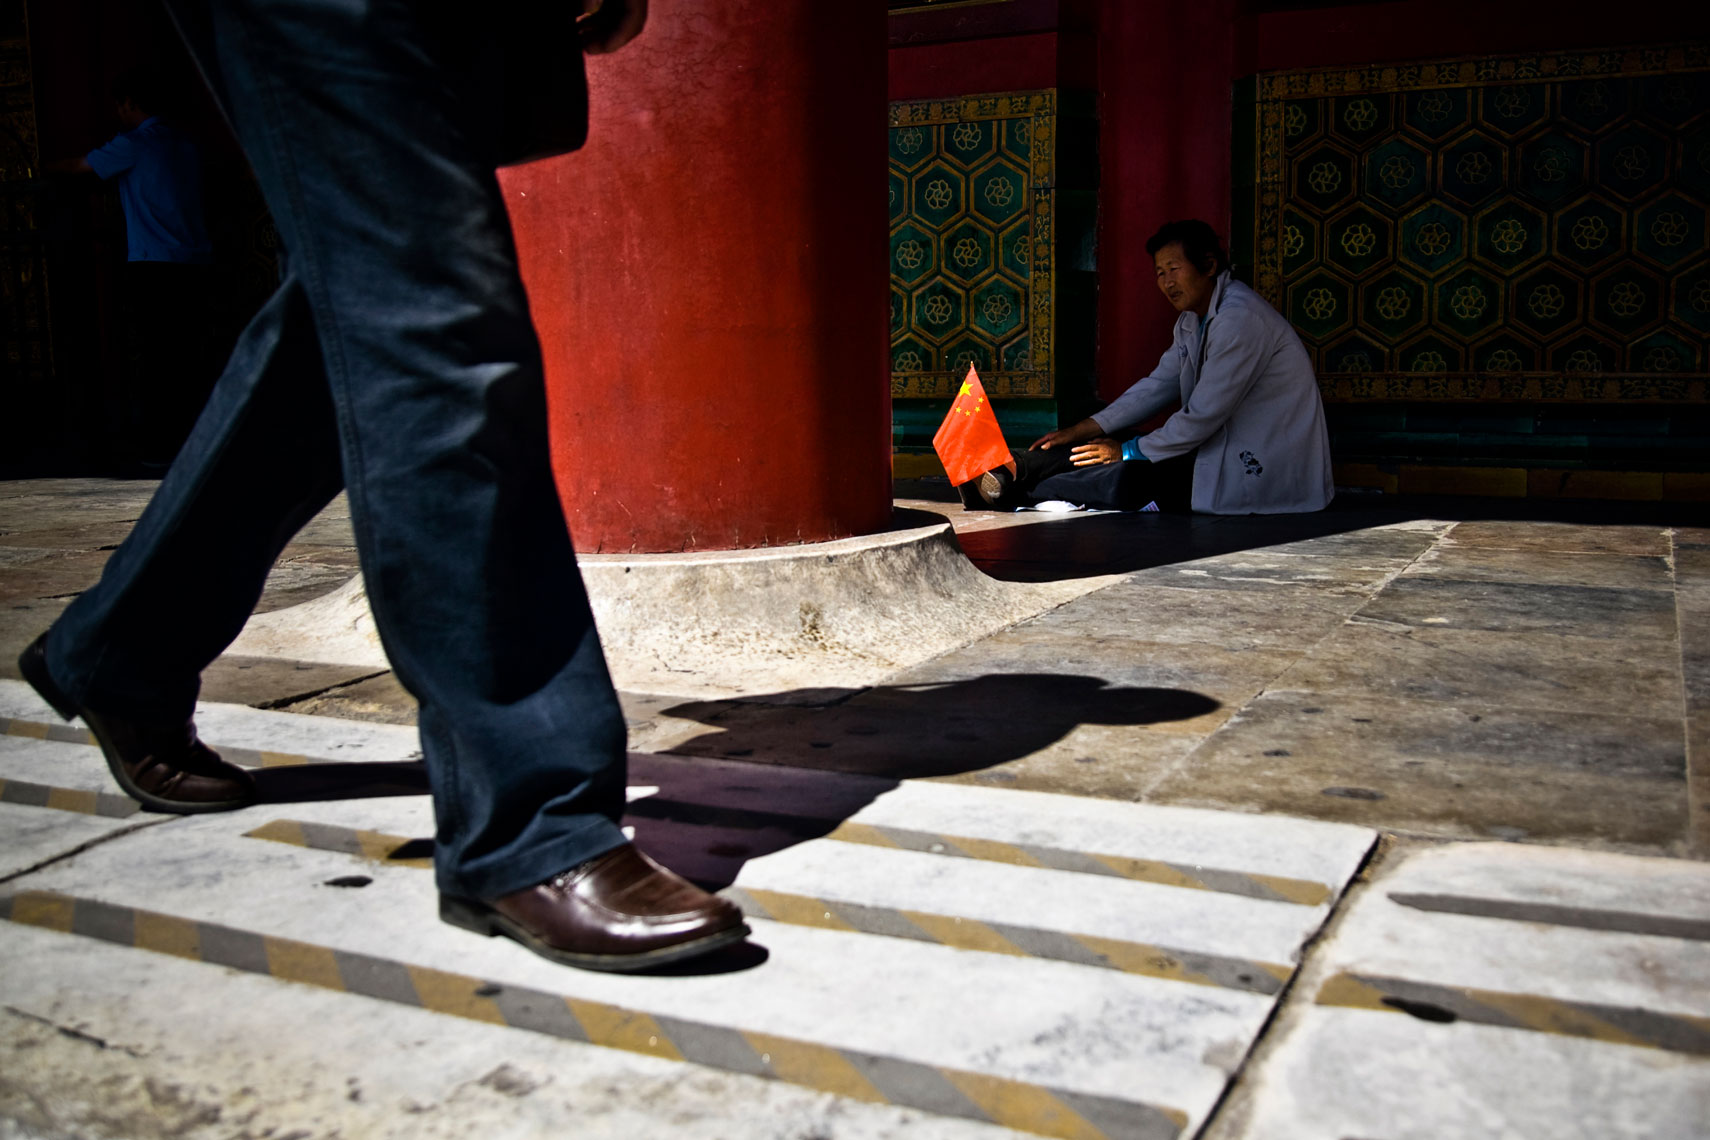 CHINA. Beijing, September 2012. A man asks for charity inside the Forbidden City.